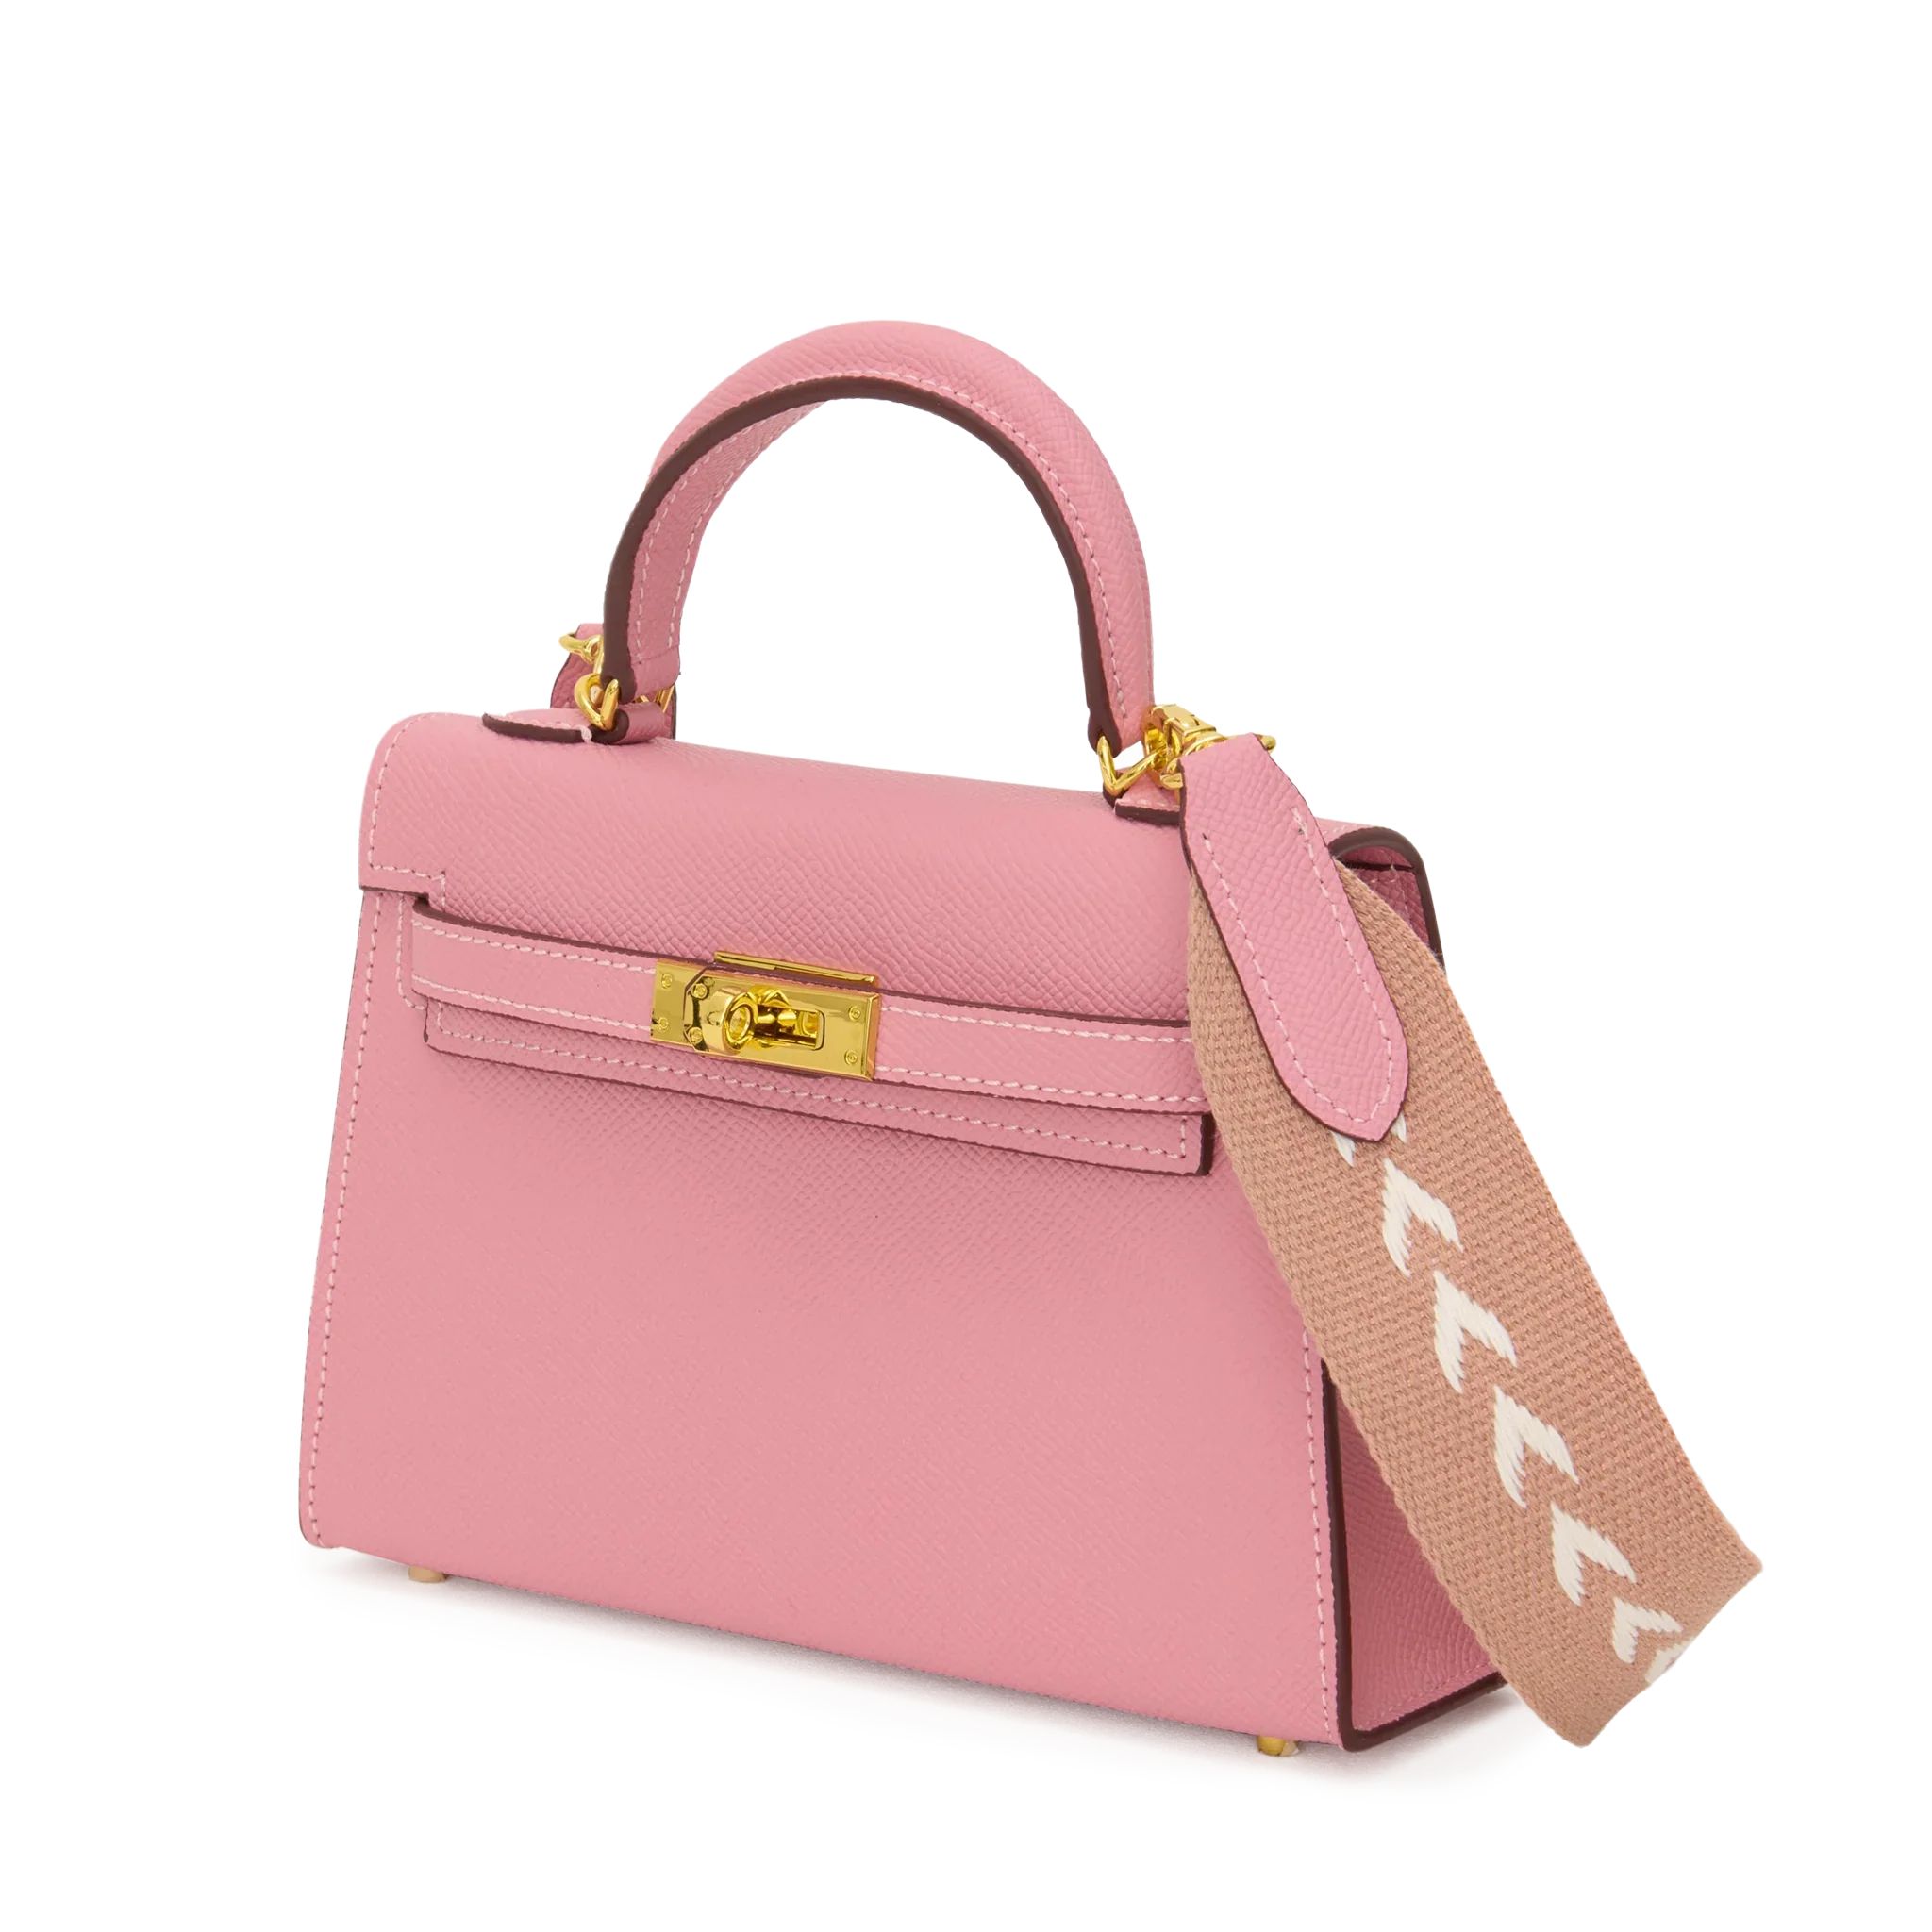 Lily & Bean Hettie Mini Bag - Blush Pink with Initials and Patterned Strap | Lily and Bean